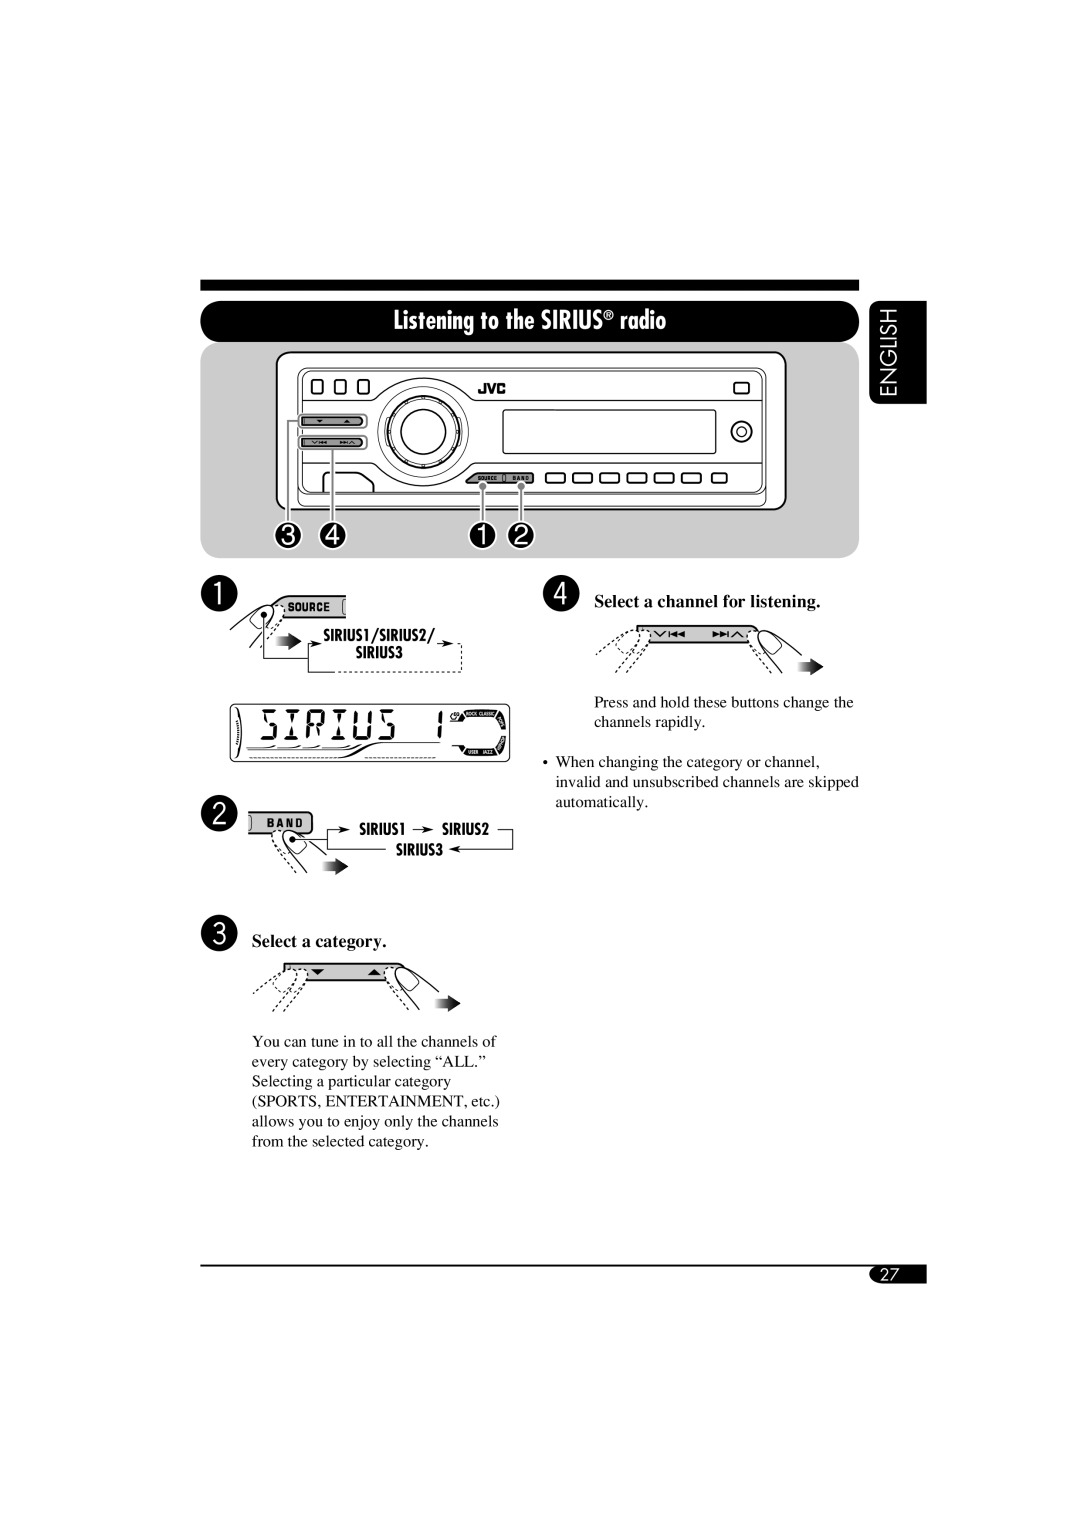 JVC KD-G510, KD-AR560 manual Listening to the SIRIUS radio, English, Select a category, ⁄Select a channel for listening 